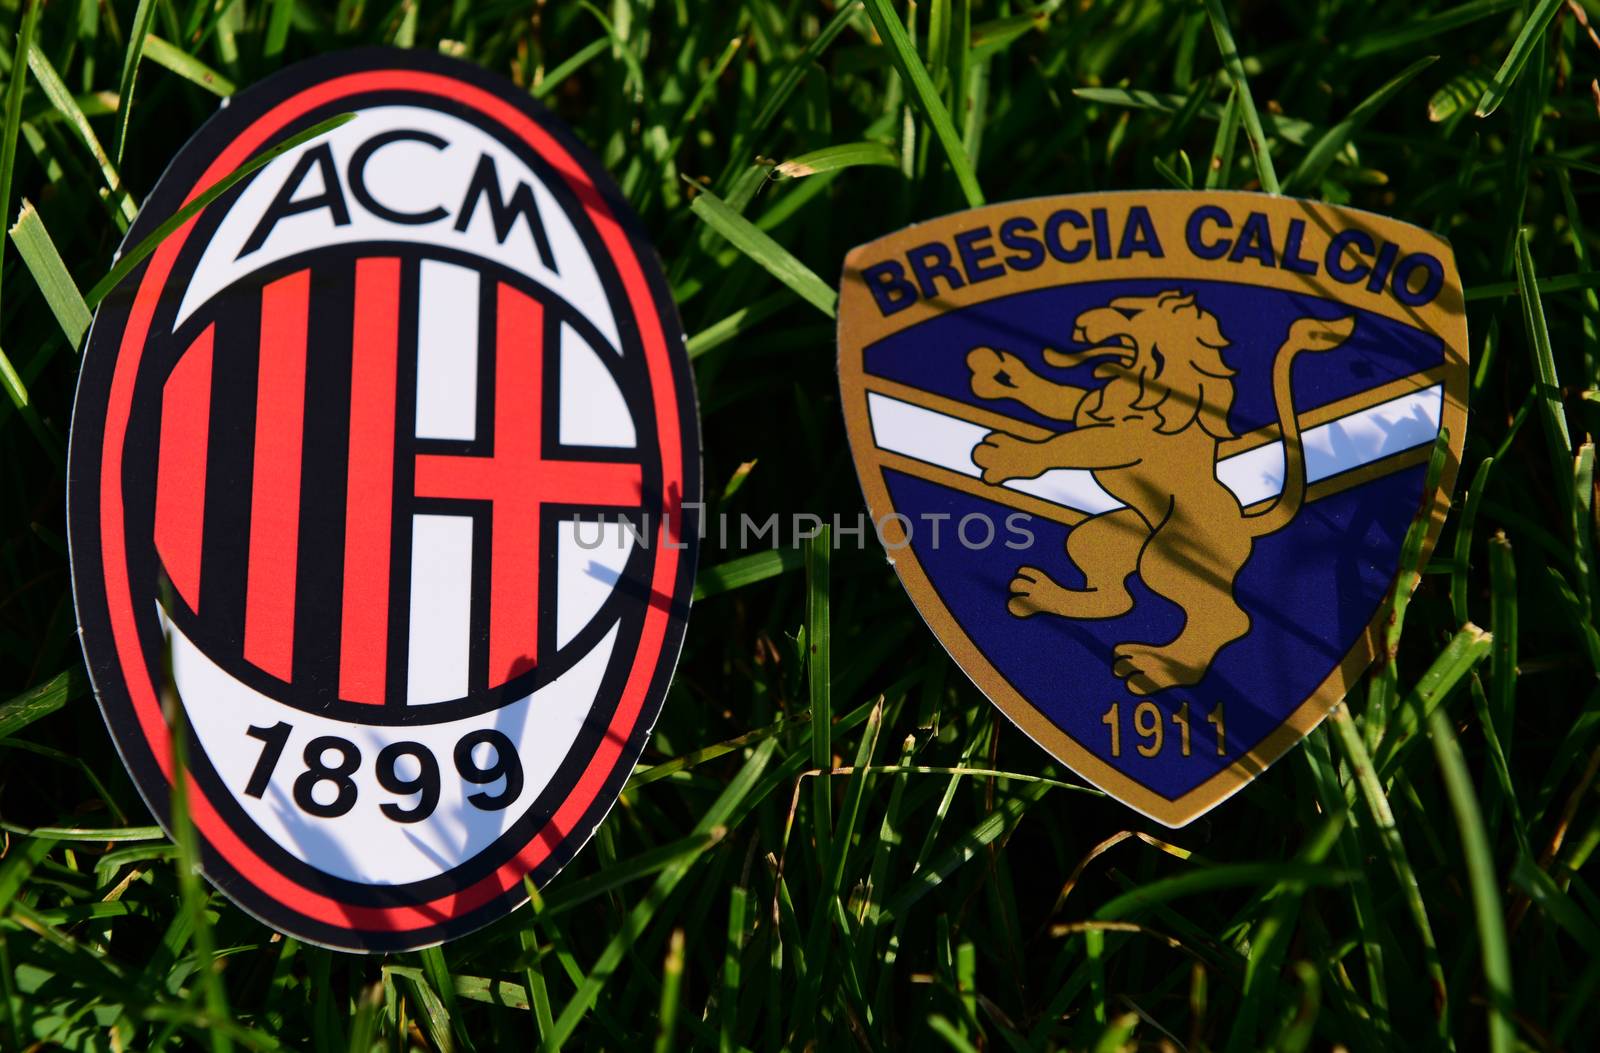 September 6, 2019, Turin, Italy. Emblems of Italian football clubs Brescia and Milan on the green grass of the lawn.